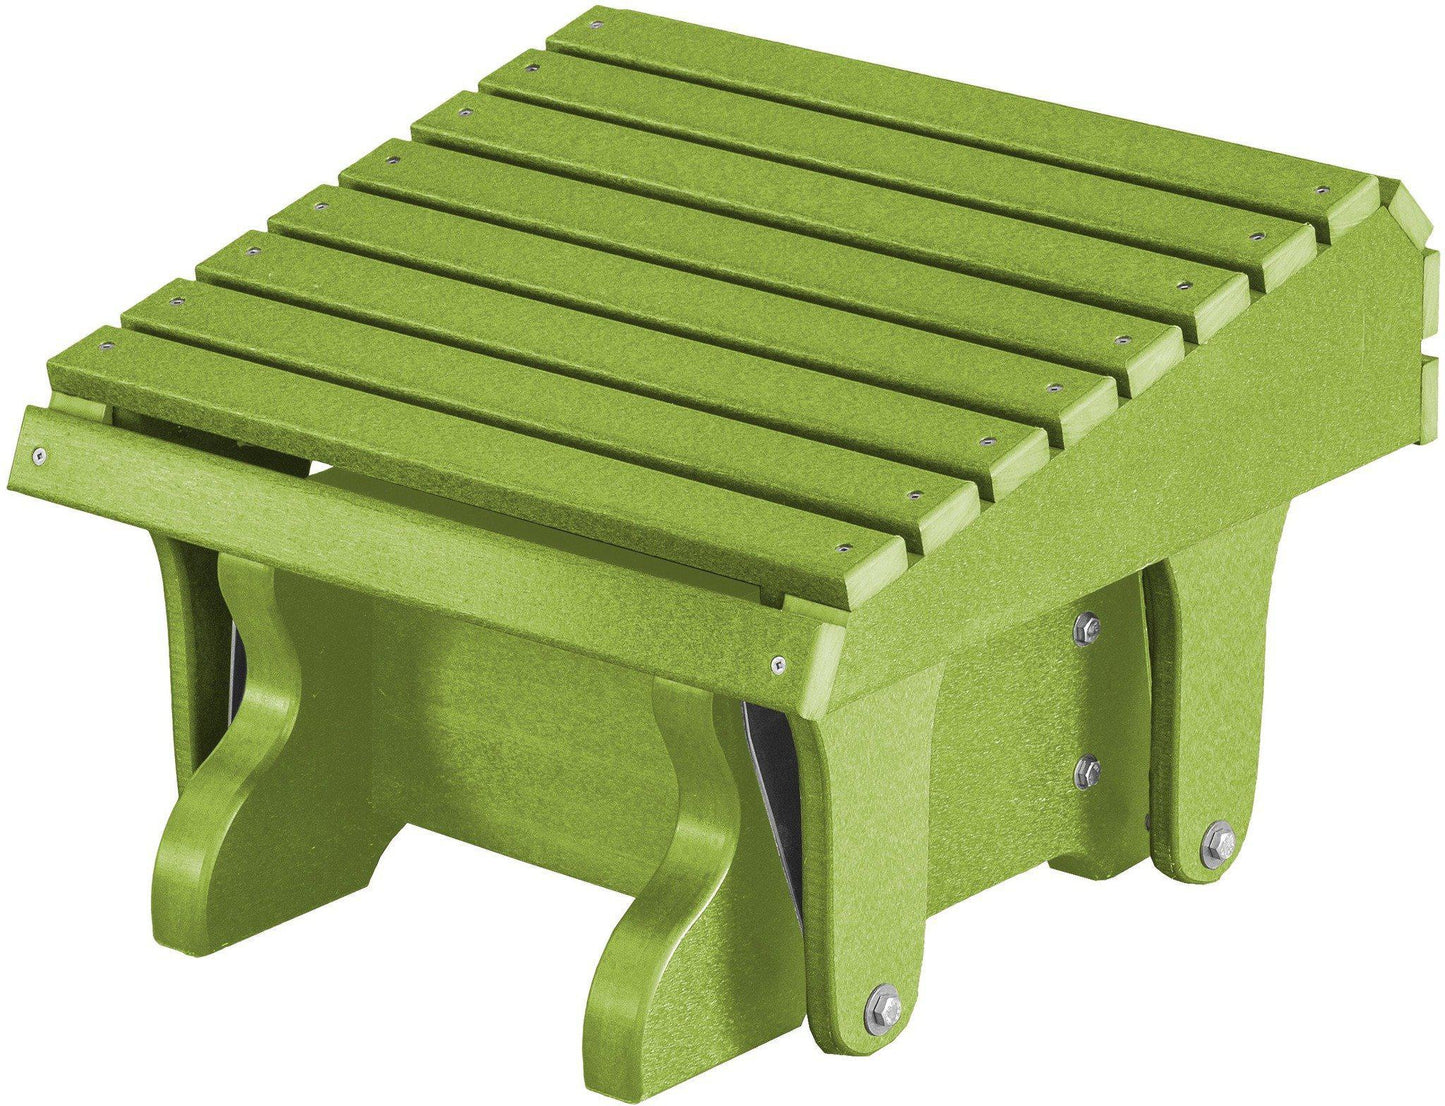 Wildridge Recycled Plastic Heritage Gliding Footrest - LEAD TIME TO SHIP 3 WEEKS